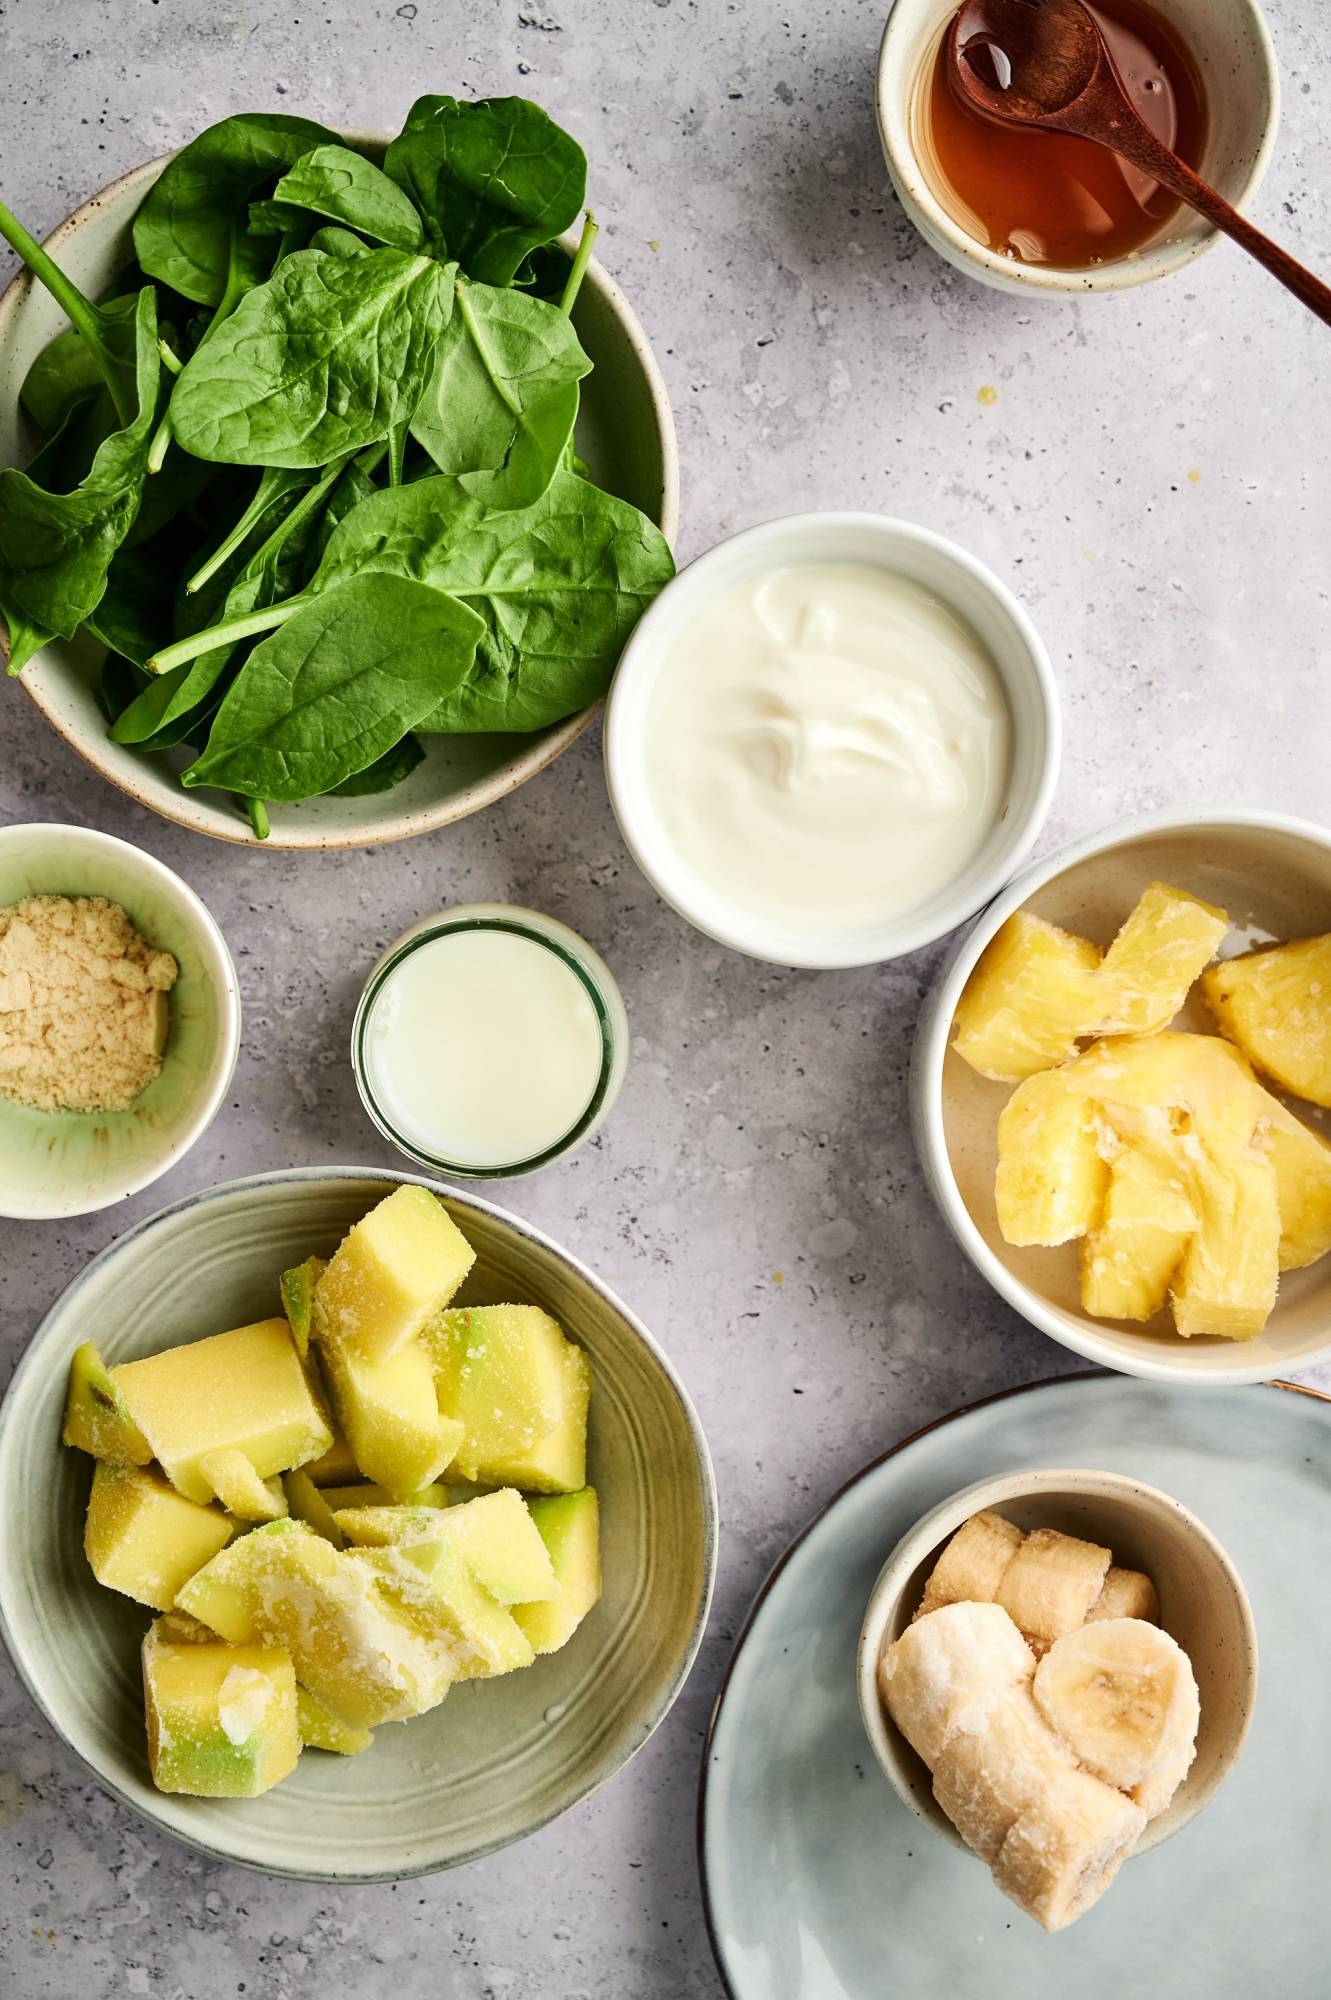 Ingredients for green smoothie bowls including frozen mango, pineapple, banana, baby spinach, milk, yogurt. and protein powder.